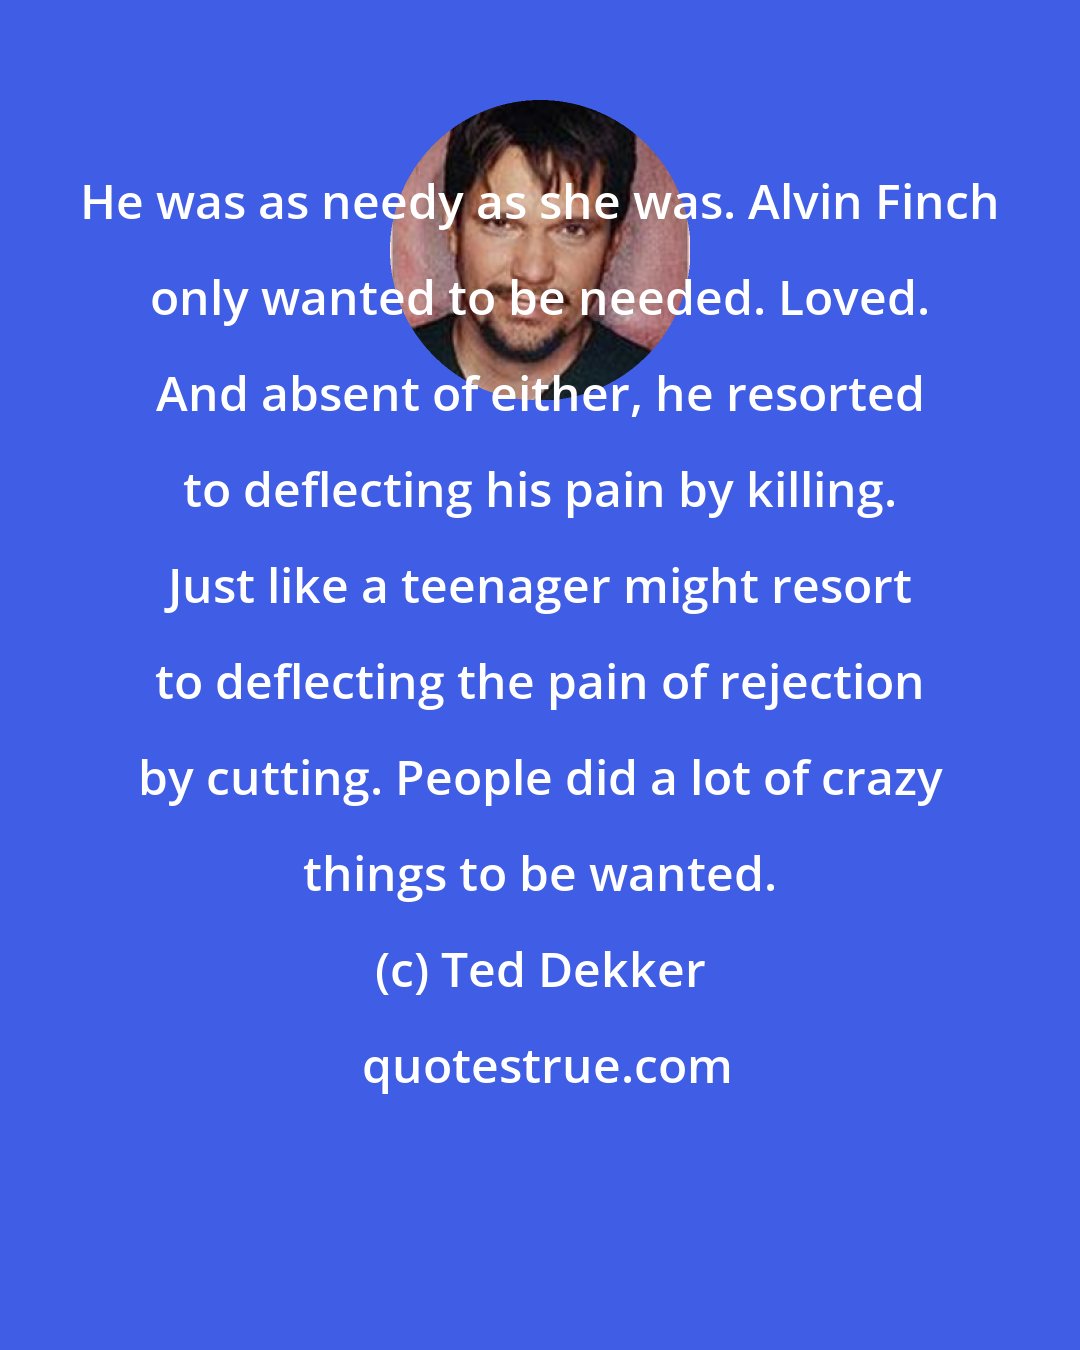 Ted Dekker: He was as needy as she was. Alvin Finch only wanted to be needed. Loved. And absent of either, he resorted to deflecting his pain by killing. Just like a teenager might resort to deflecting the pain of rejection by cutting. People did a lot of crazy things to be wanted.